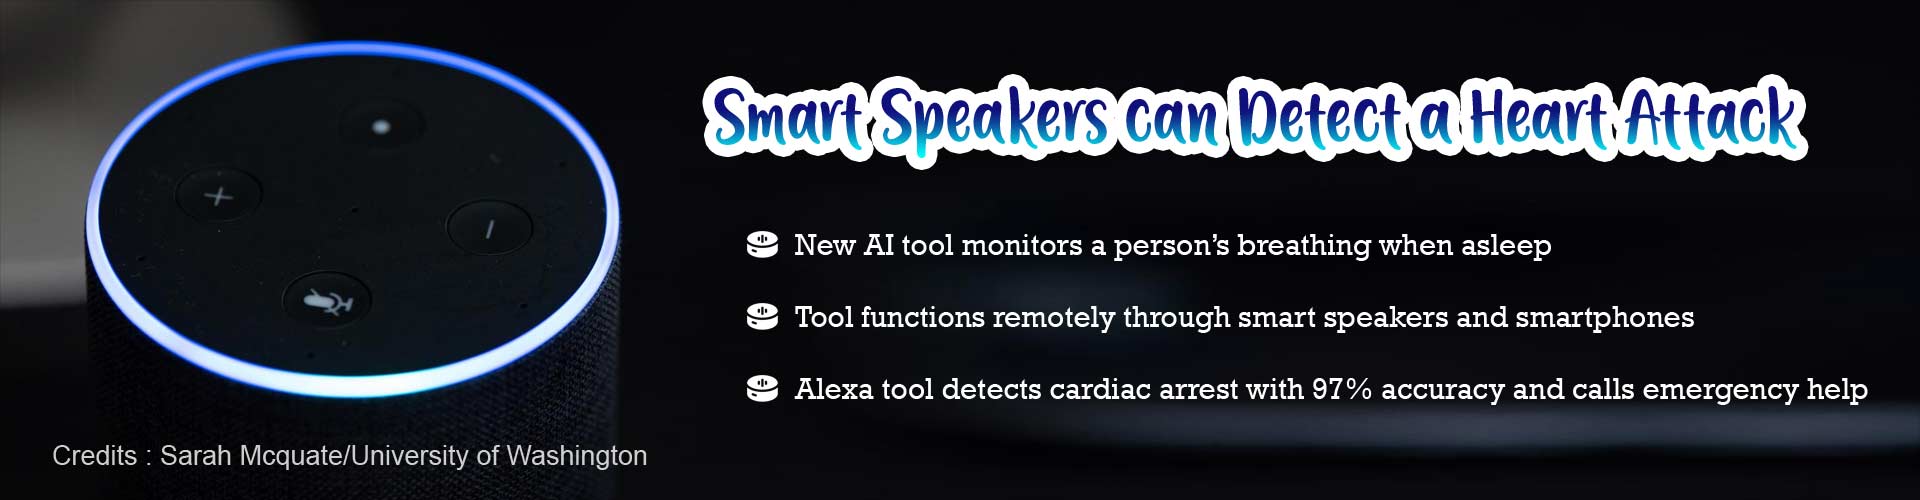 Smart speakers can detect a heart attack. New AI tool monitors a person's breathing when asleep. Tool functions remotely through smart speakers and smartphones. Alexa tool detects cardiac arrest with 97% accuracy and calls emergency help.